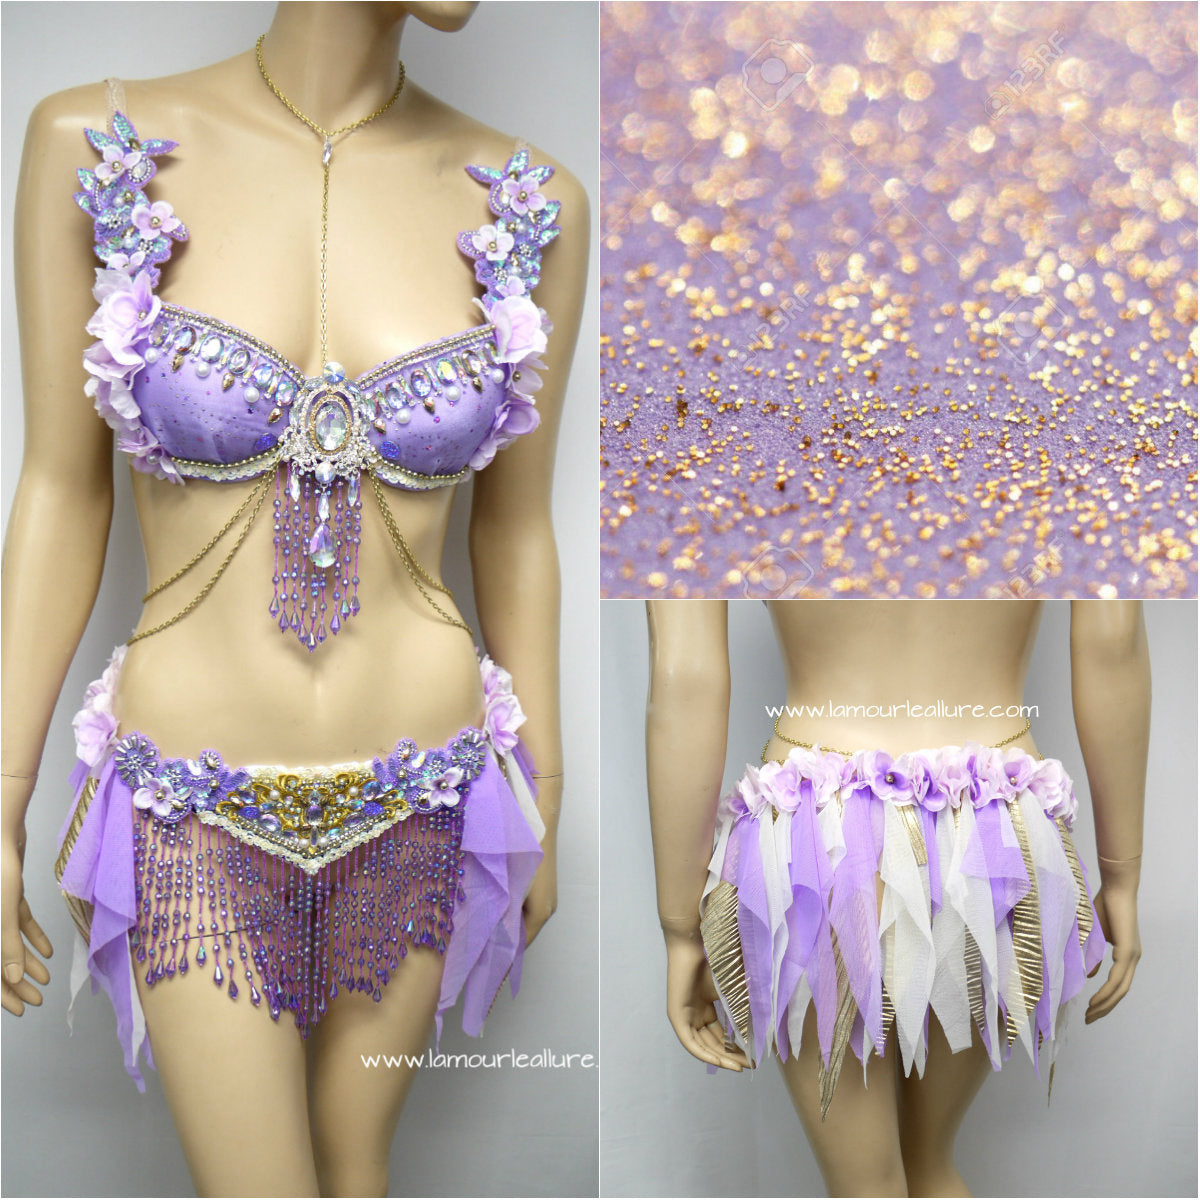  Green and Purple Floral Woodland Forest Fairy Monokini Dress  Rave Bra Dance Costume : Handmade Products